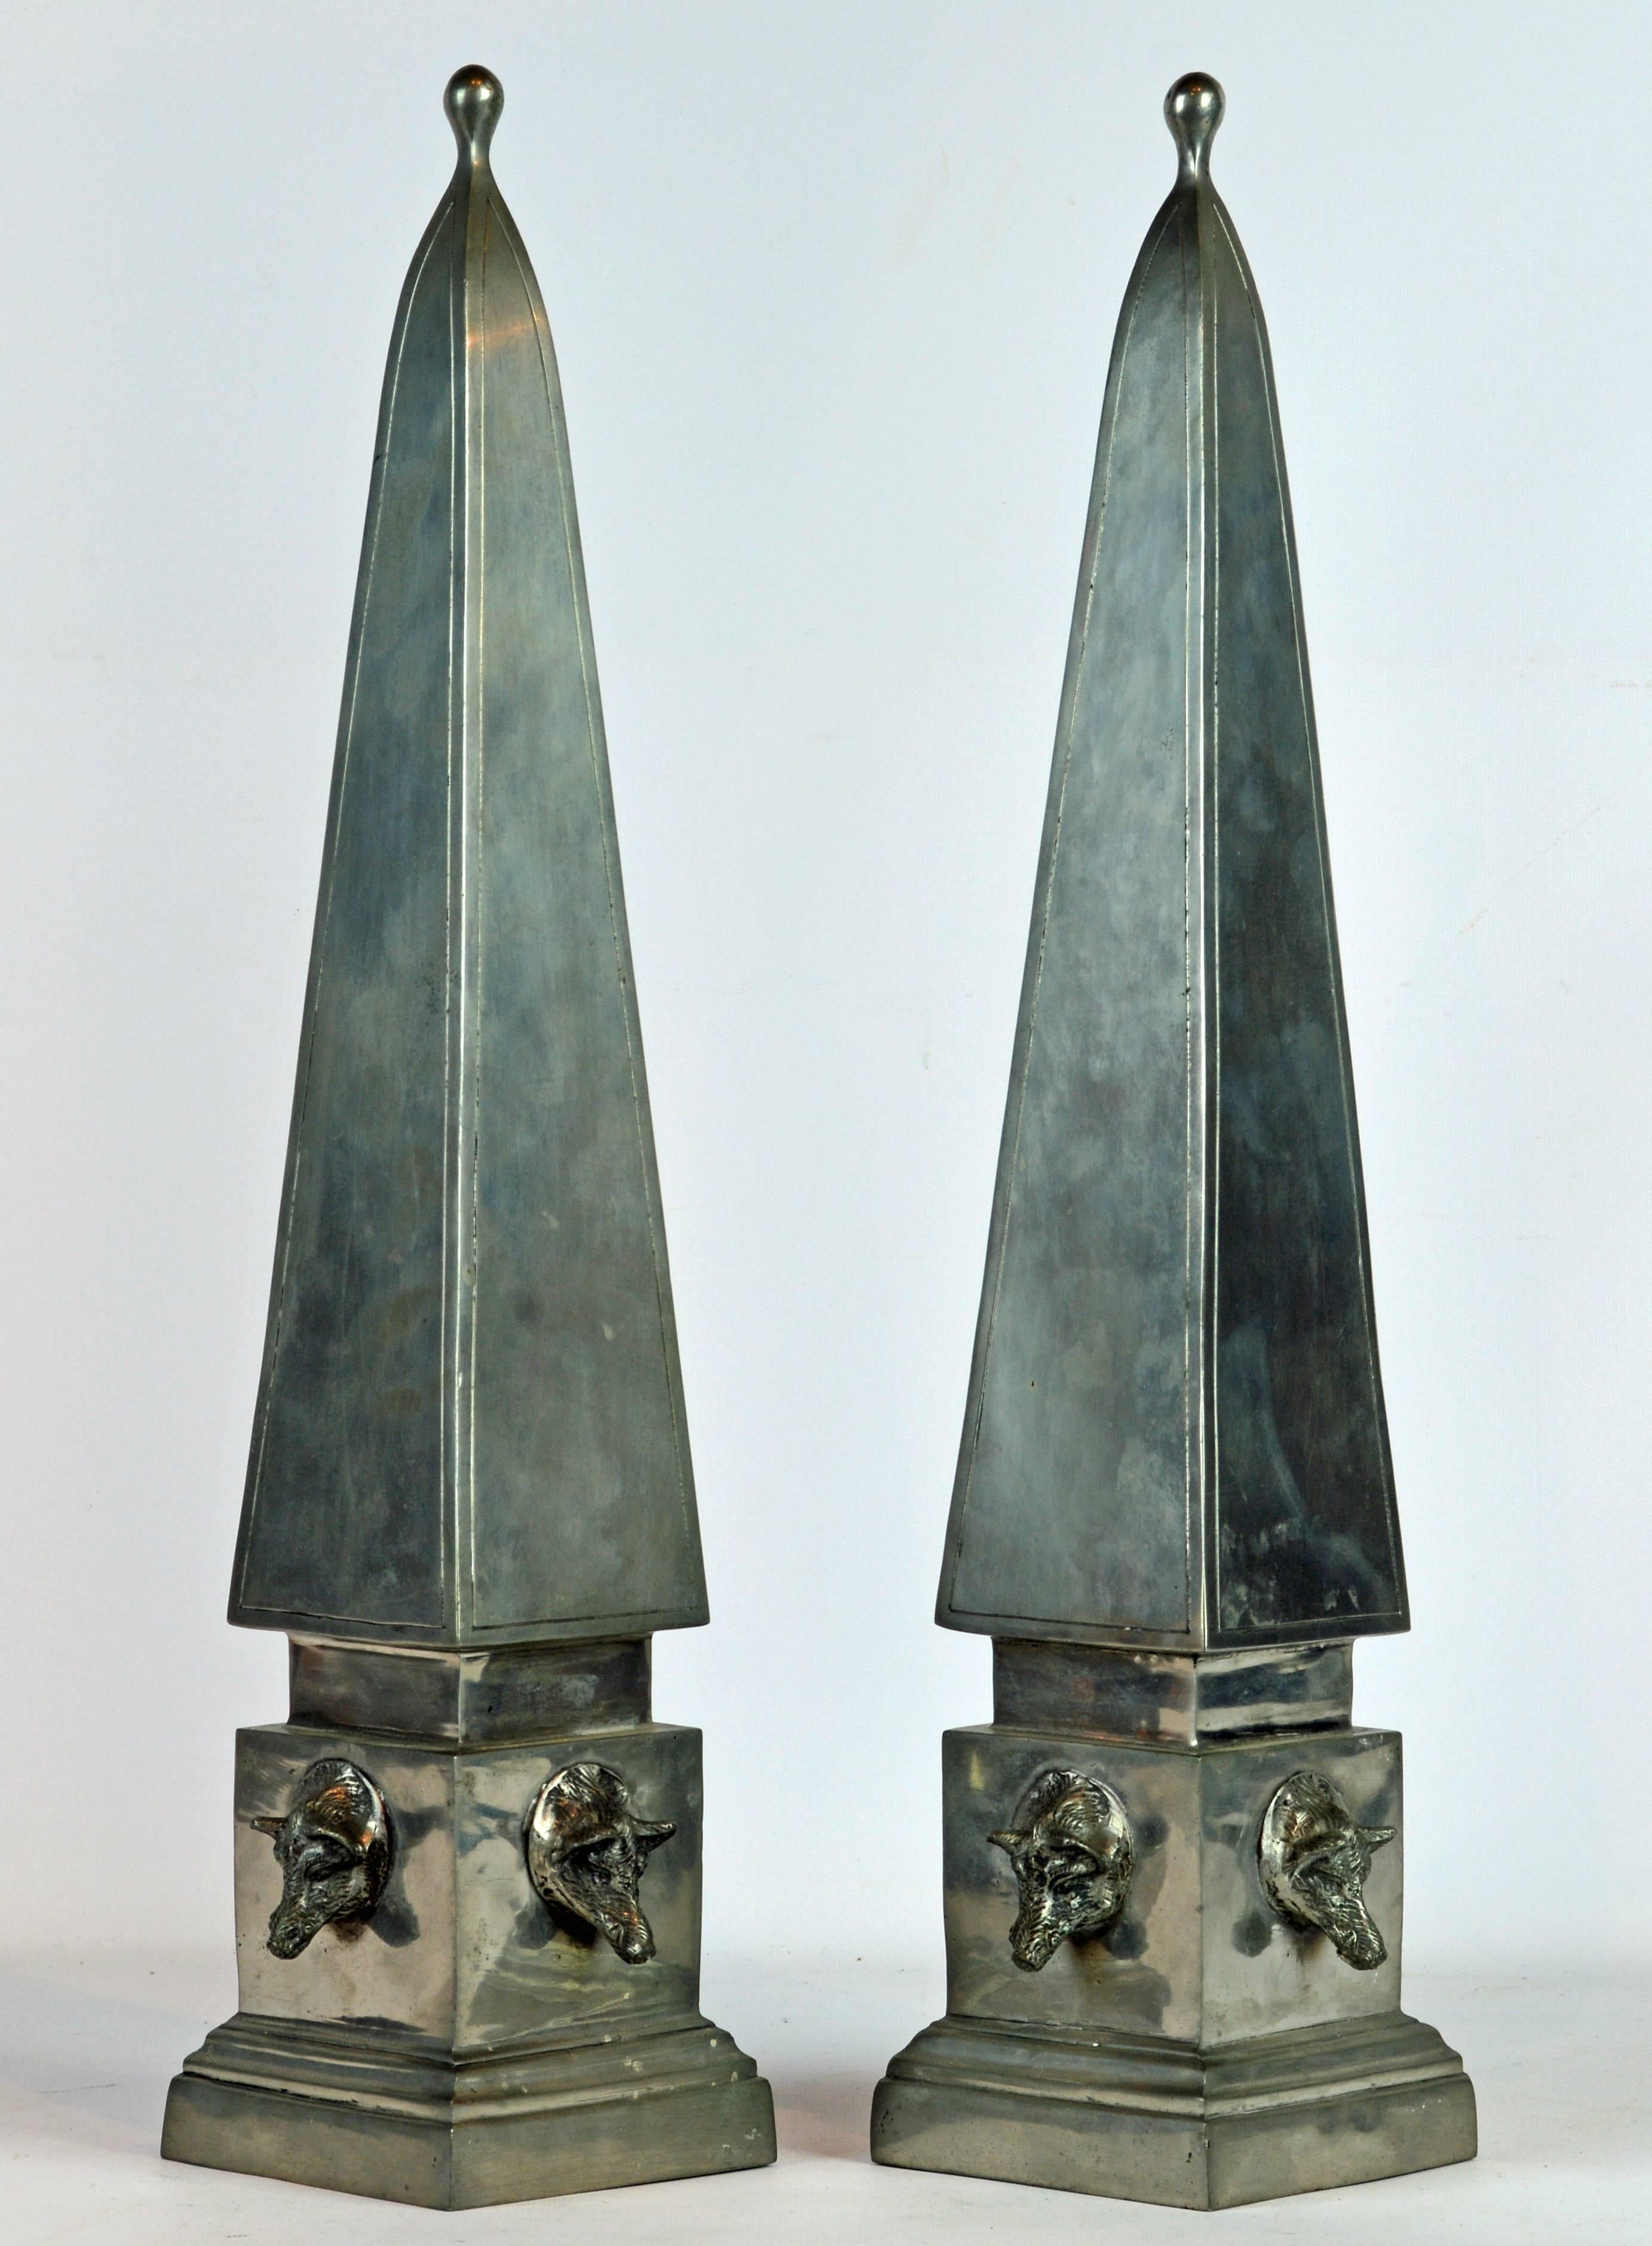 Neoclassical Pair of Large Mid Century Portuguese Pewter Obelisk Models with Boar's Heads